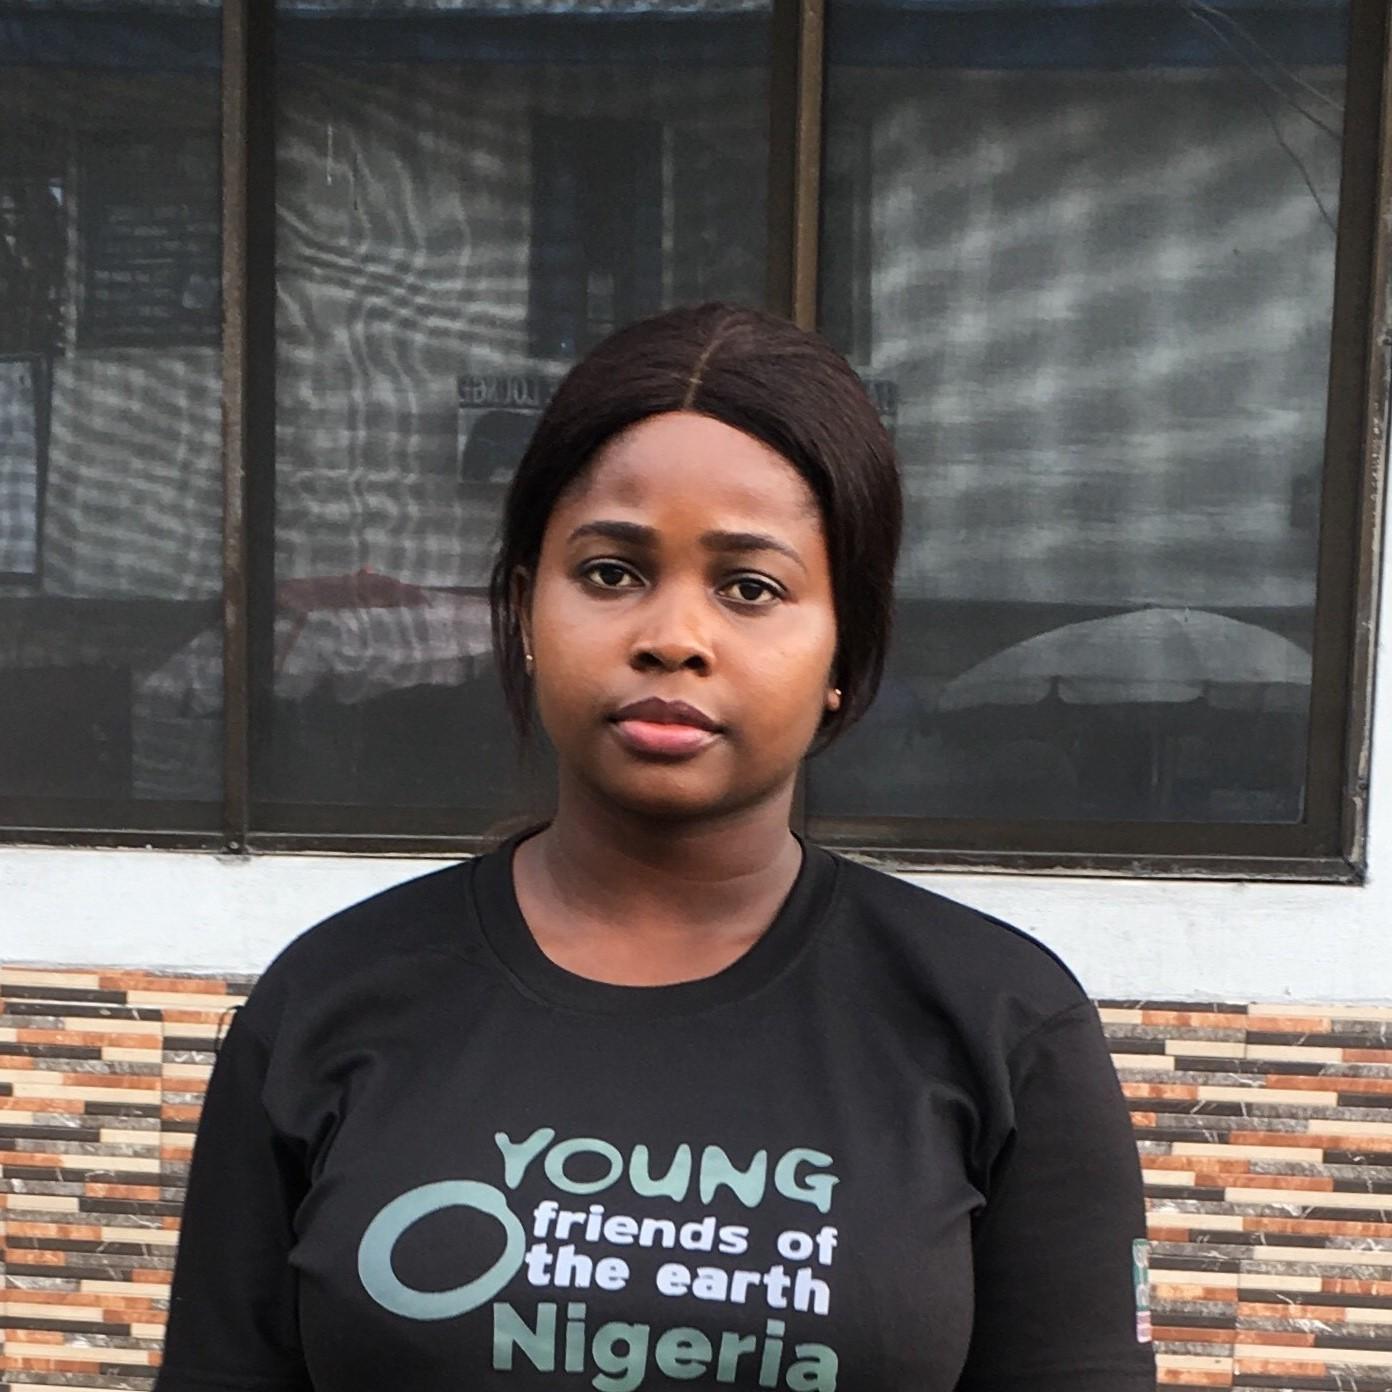 Jennifer Ugorji (21), talsperson for Young Friends of the Earth Nigeria